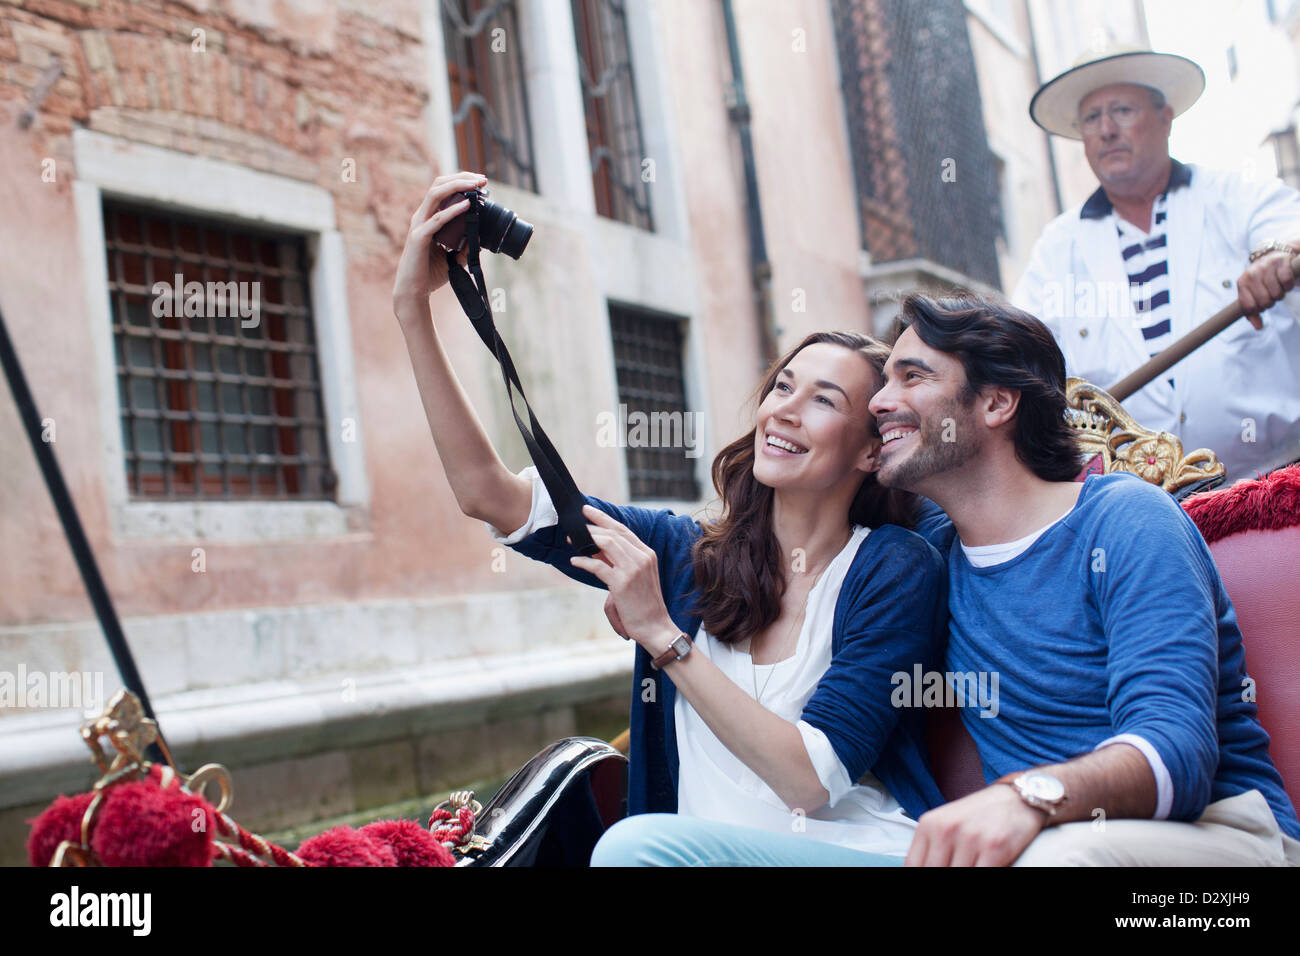 Smiling couple taking self-portrait with digital camera in gondola on canal in Venice Stock Photo